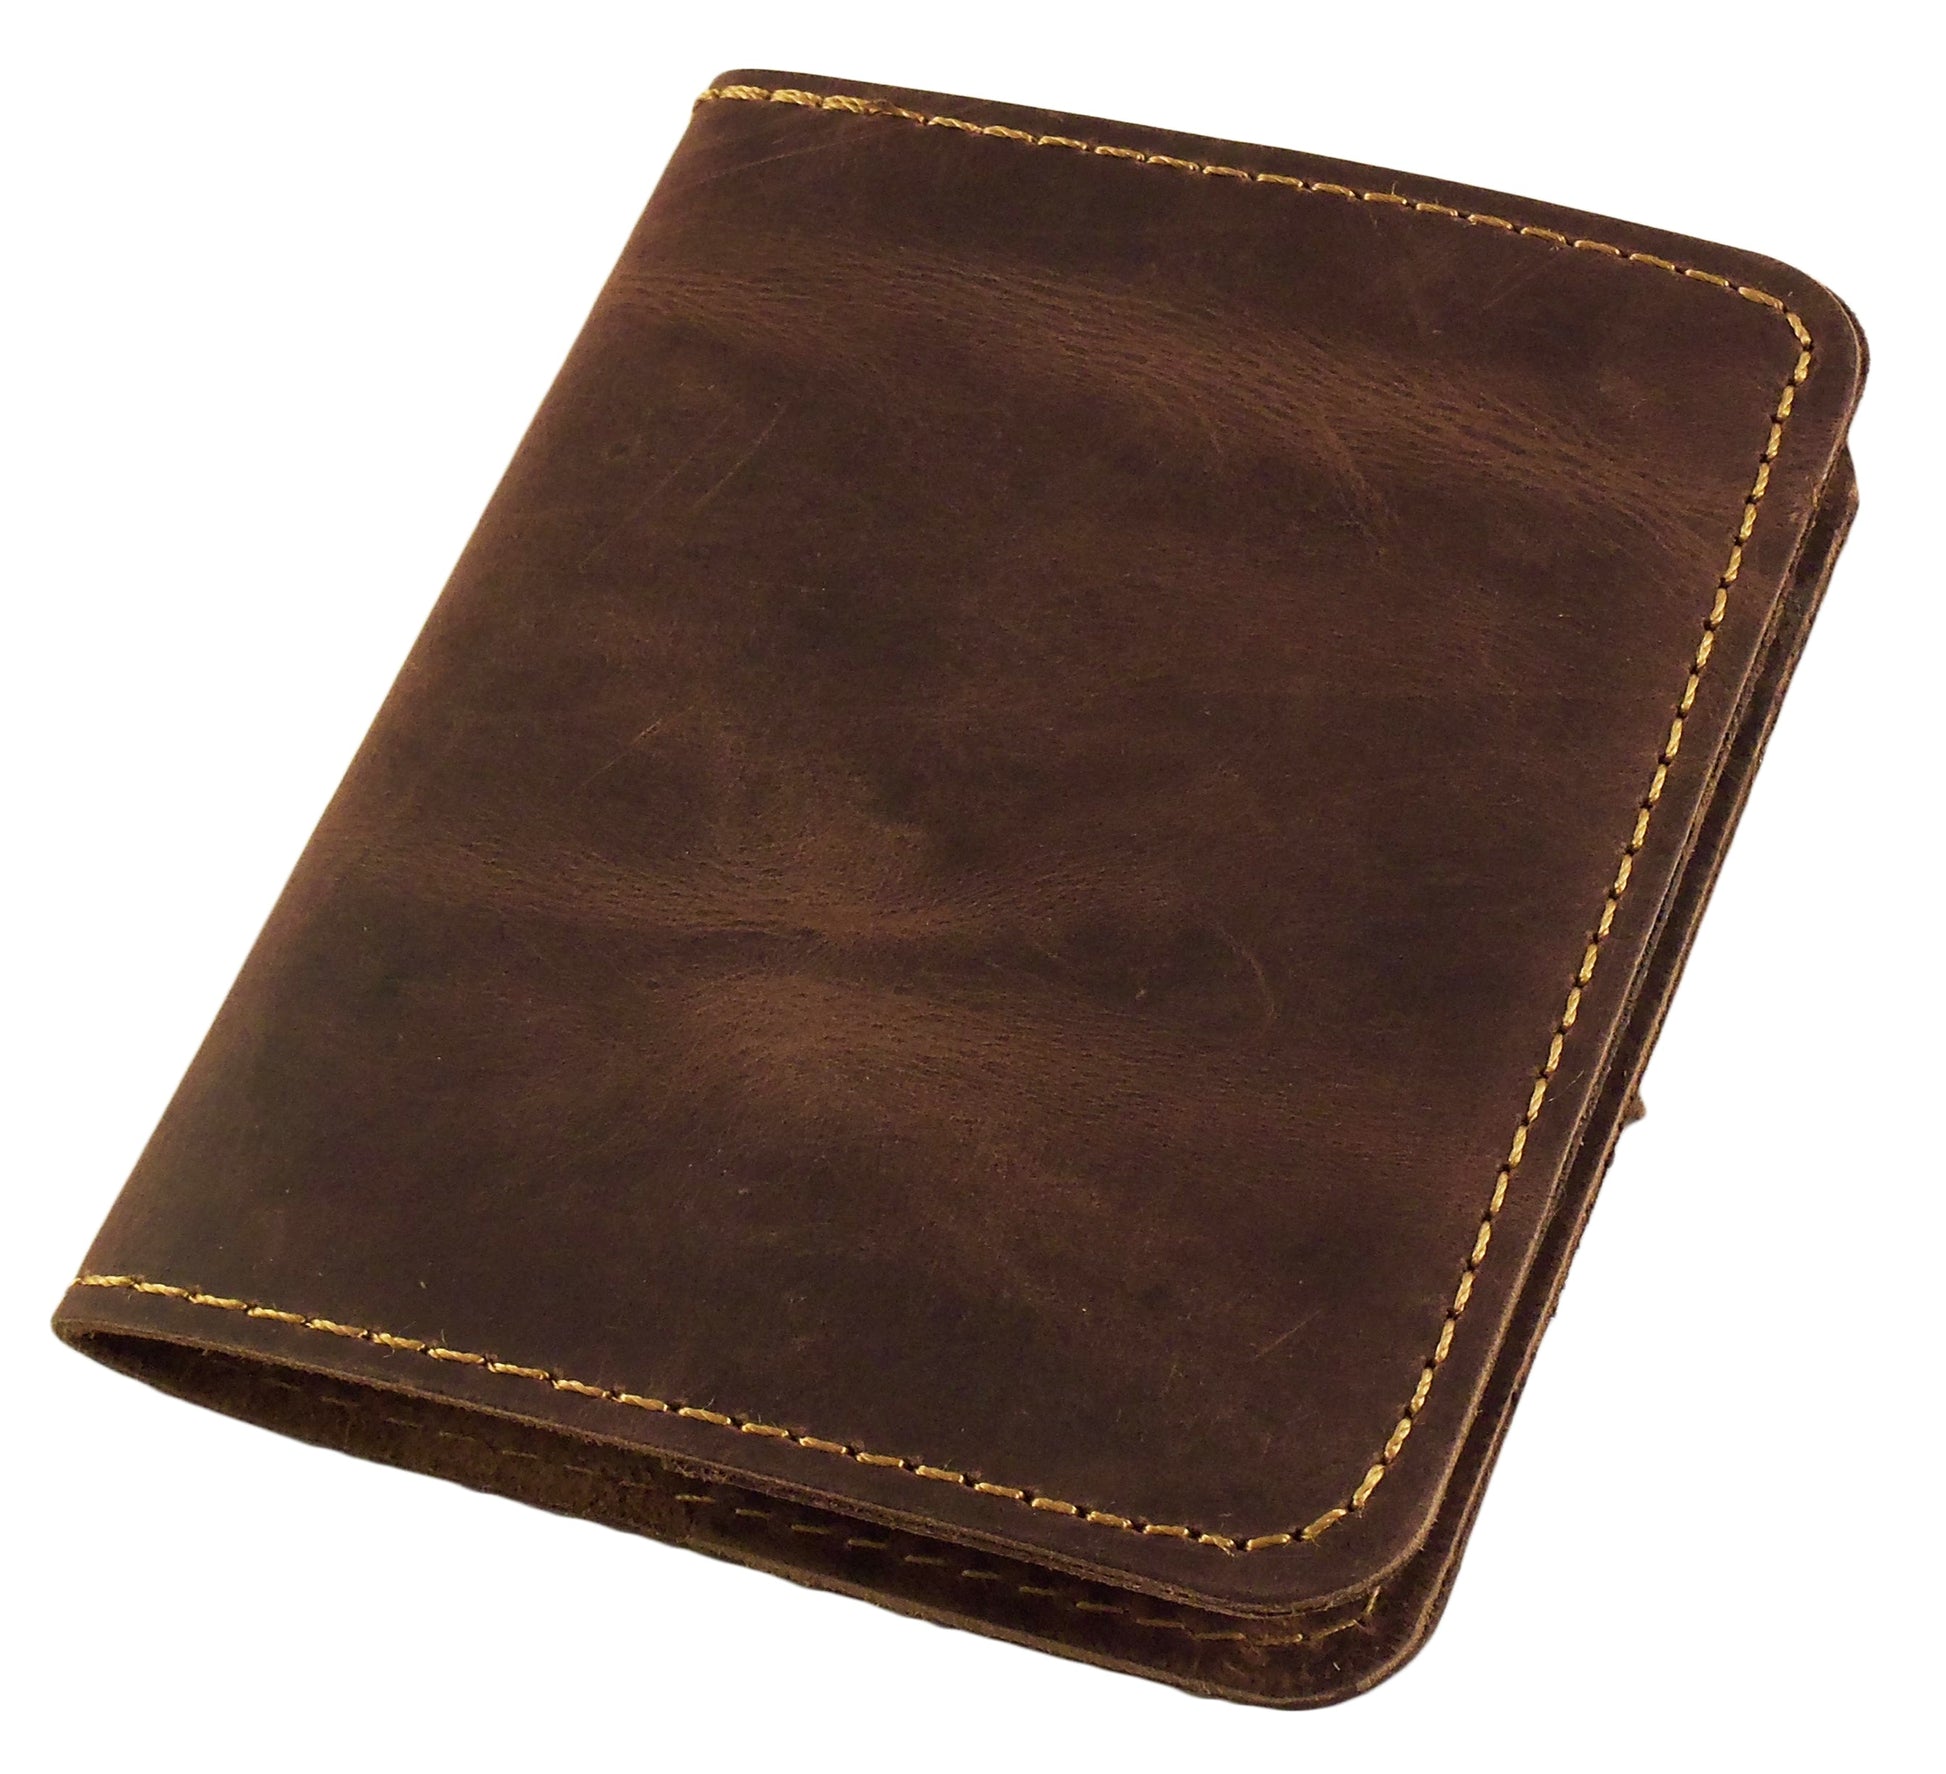 Refillable Leather Pocket Notebook - Mini Composition Cover - Fits Standard 4.5 x 3.25" Mini Composition Book - Rustic Ridge Leather